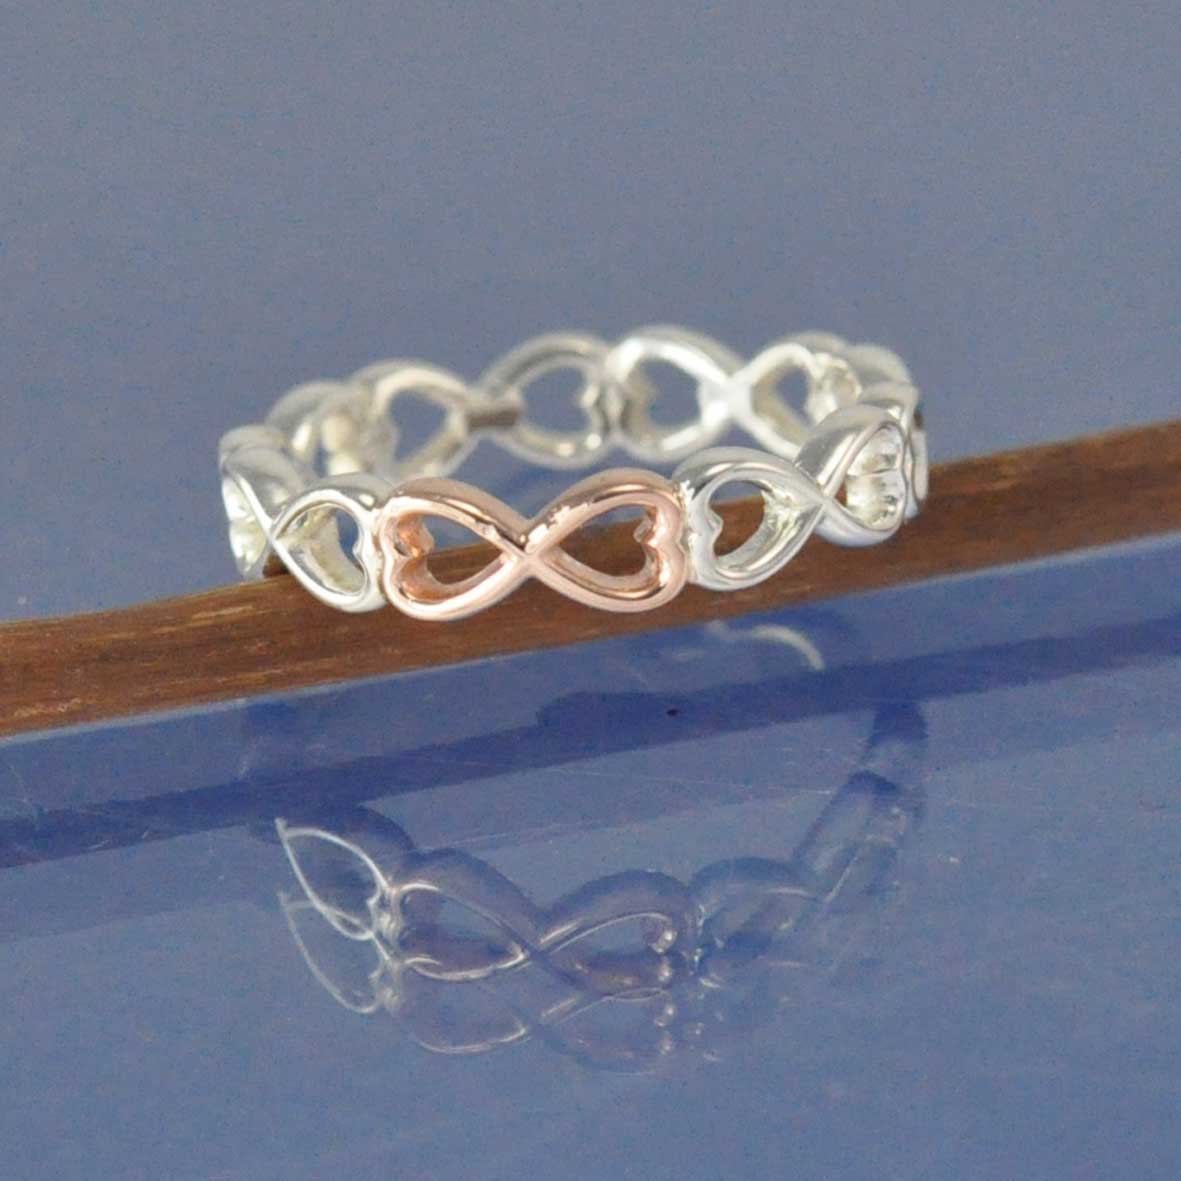 Infinity Heart Ring with Cremation Ashes Ring by Chris Parry Jewellery